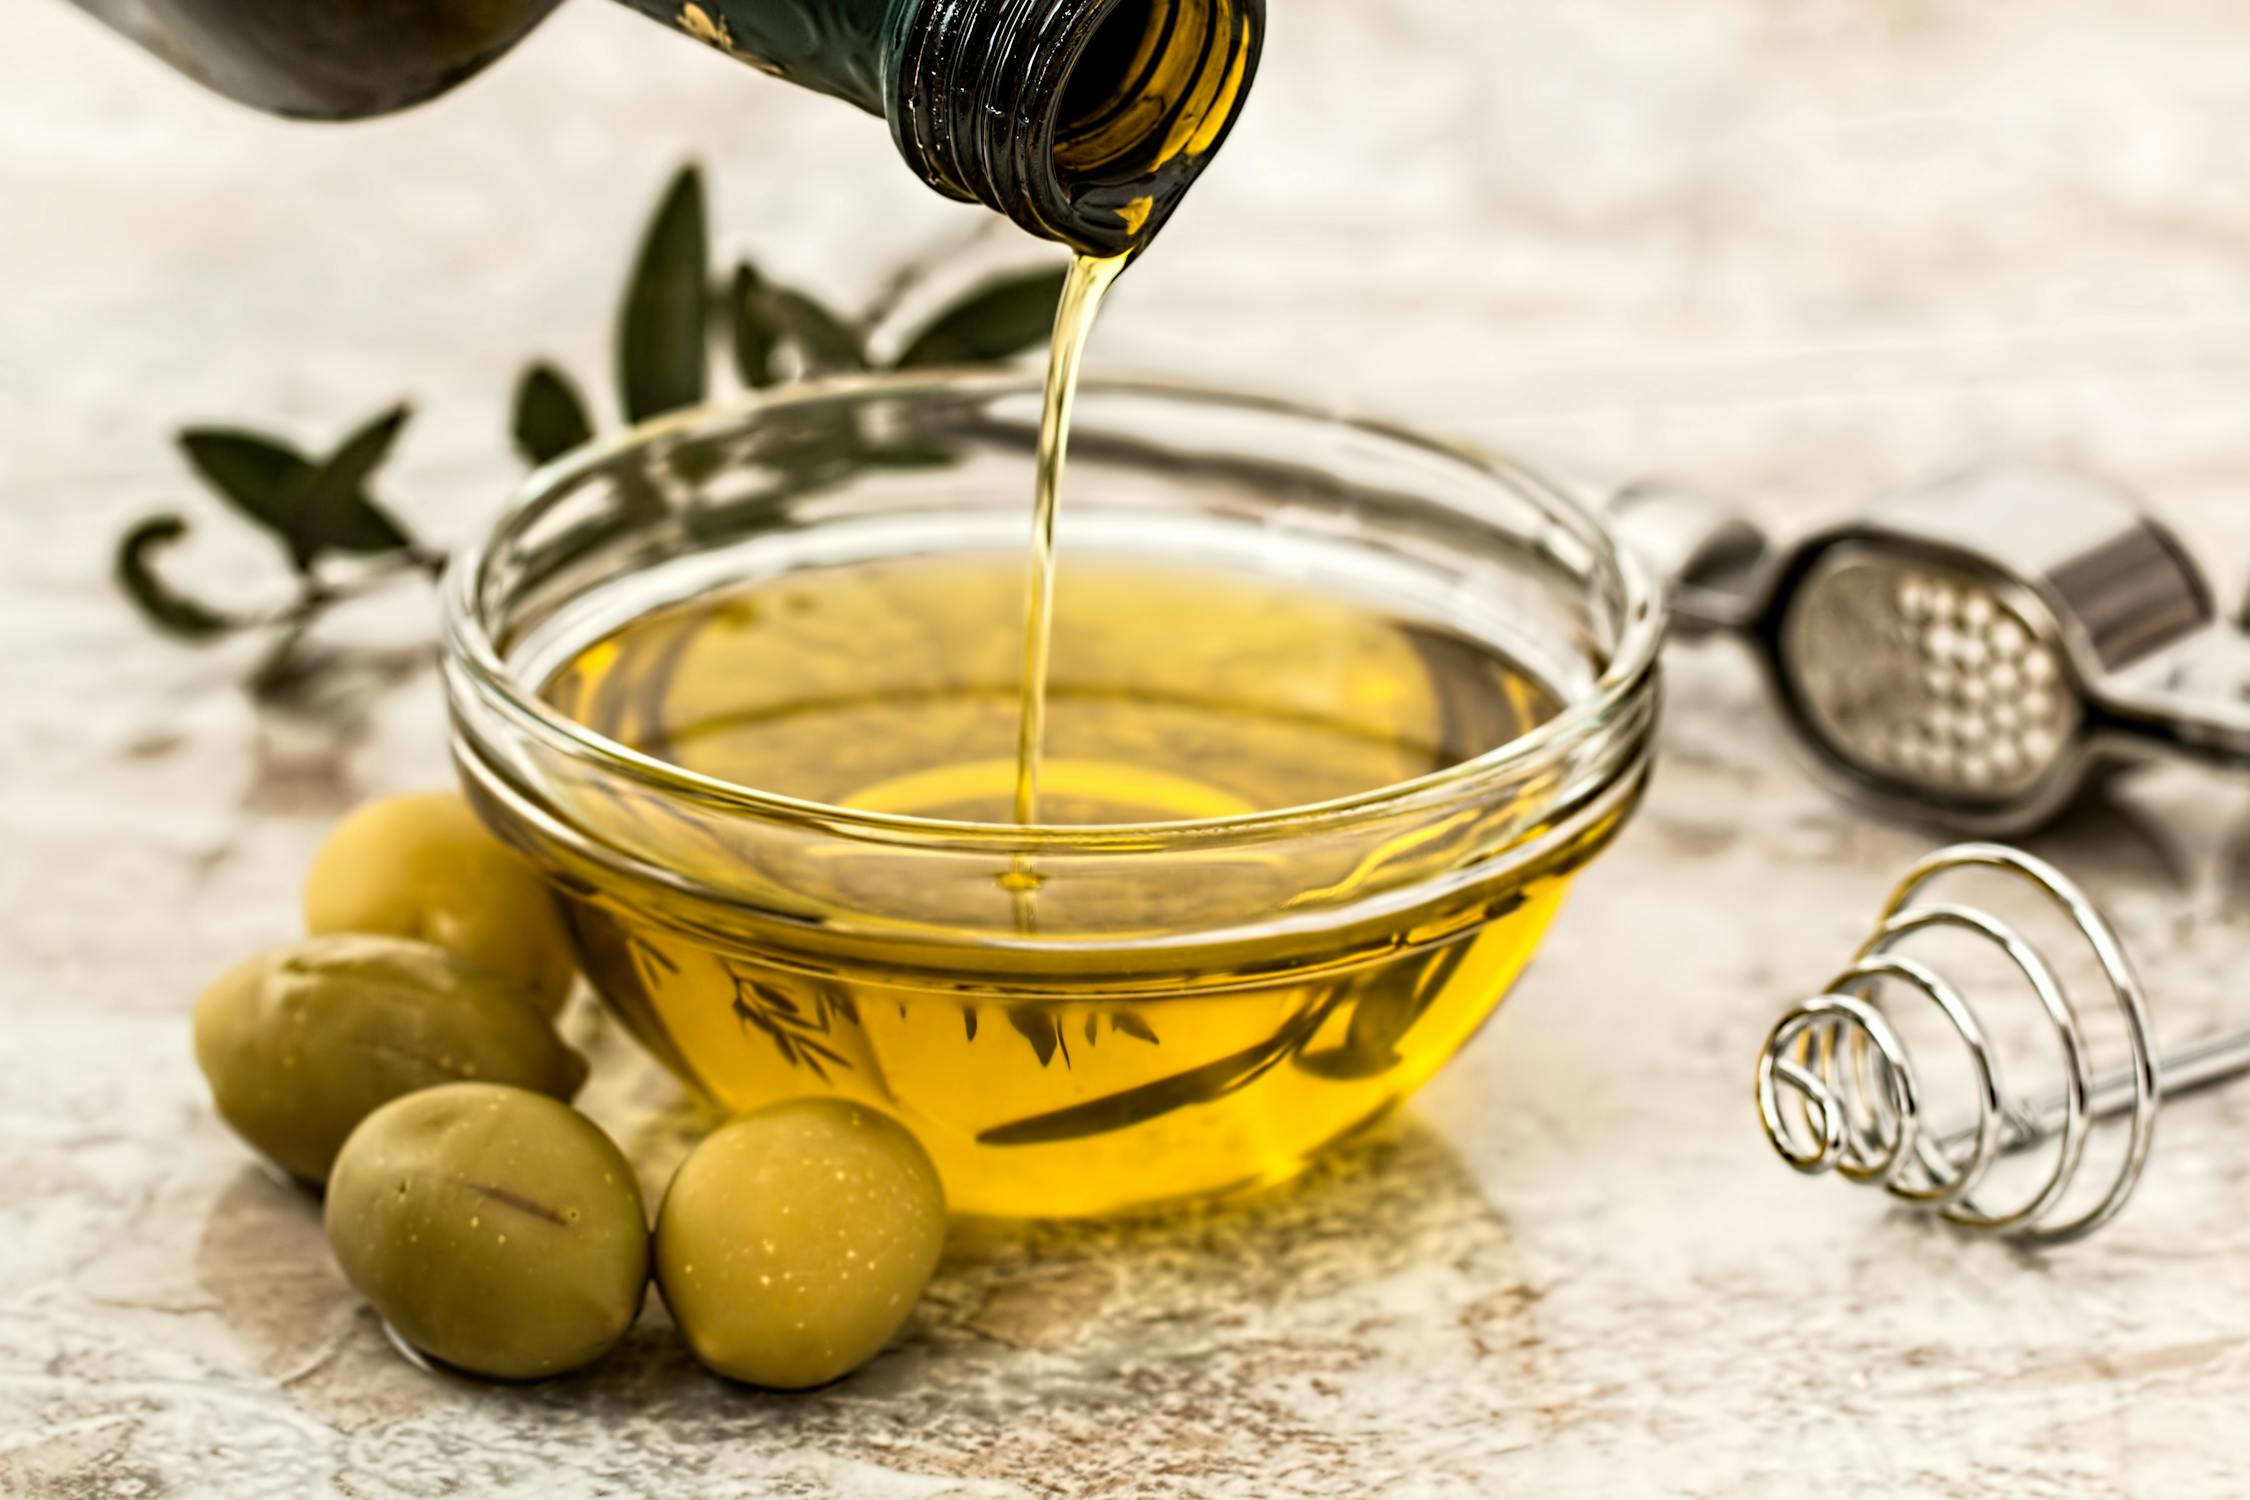 Police Arrest 11 People in Spain and Italy for Selling Fake Olive Oil